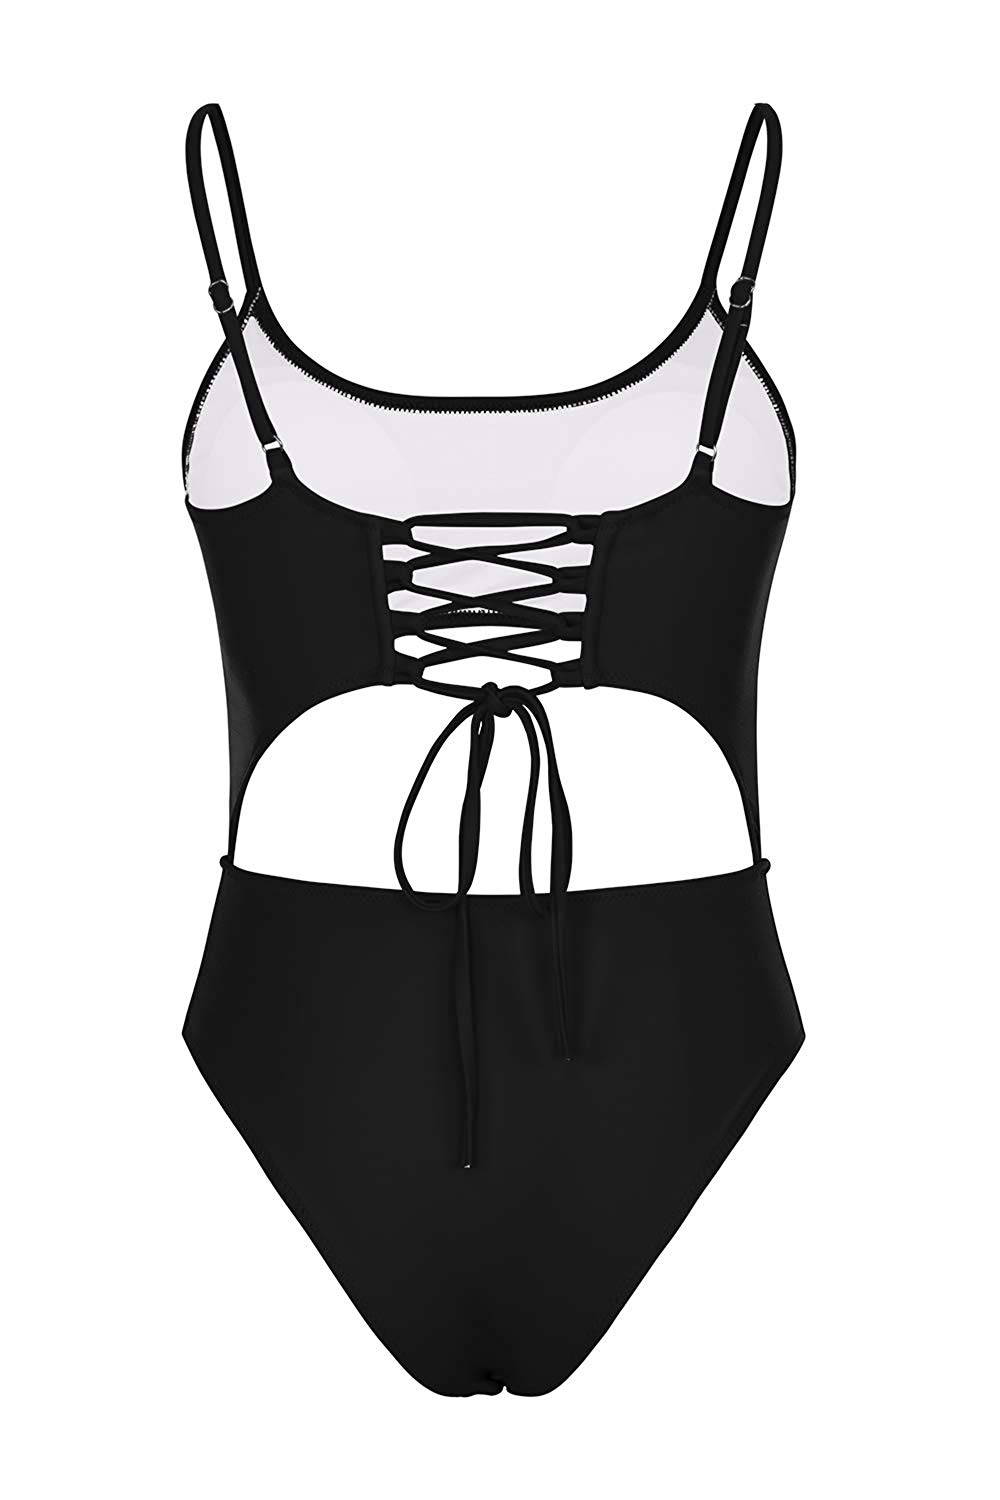 LEISUP Ladies Strappy Lace Up Back High Rise Thong Monokini, Black ...